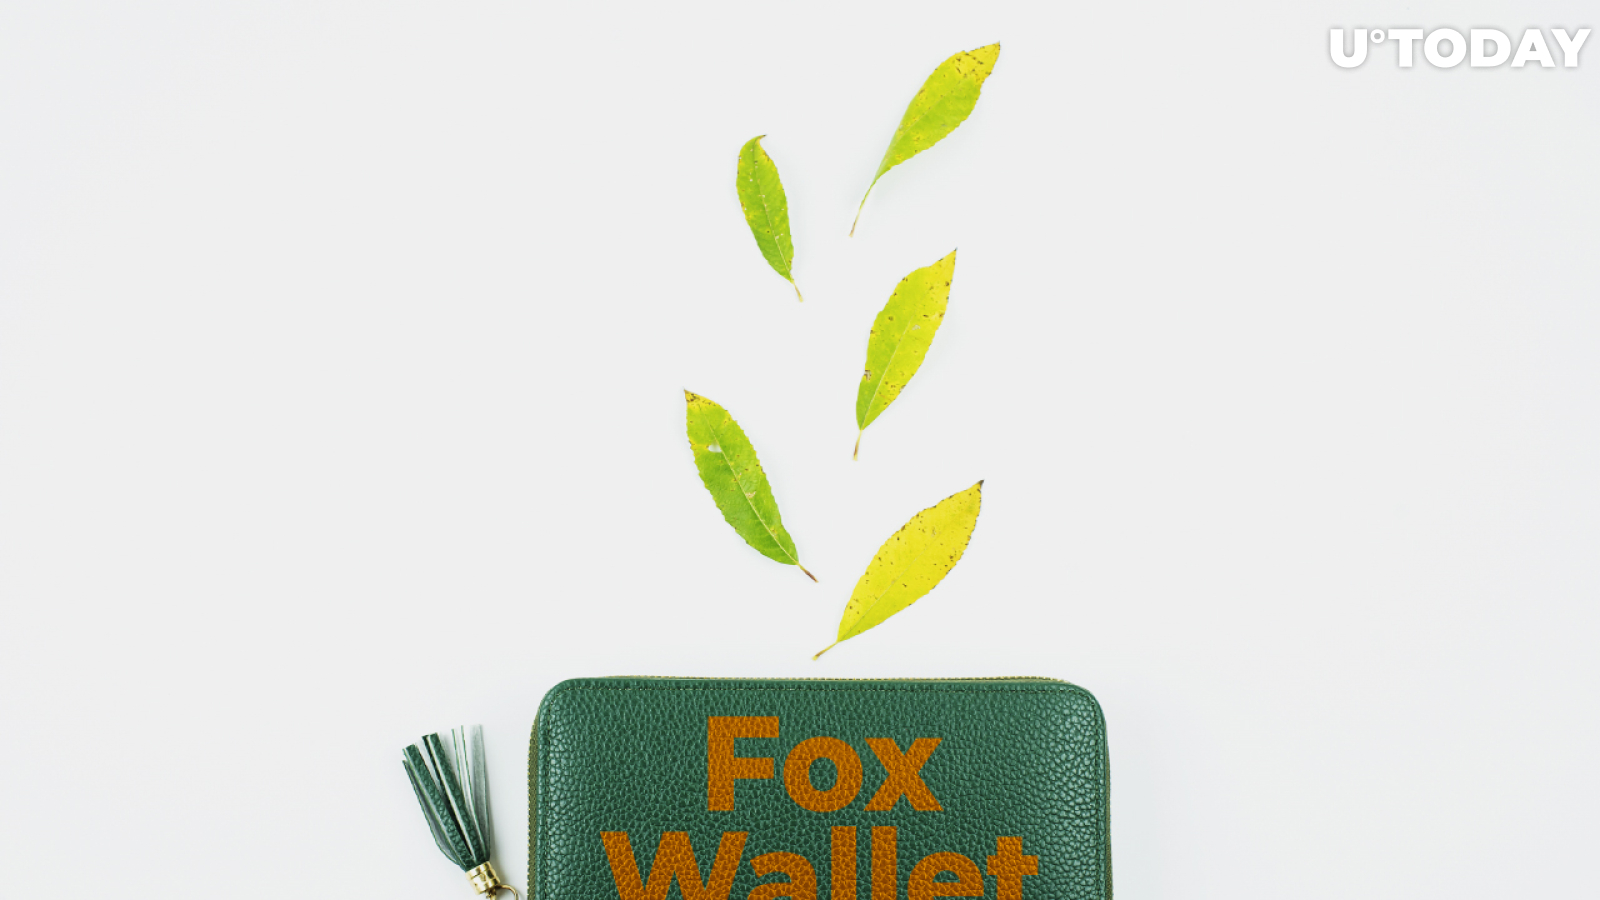 First-ever Decentralized Wallet for Filecoin Ecosystem: Introducing Fox Wallet